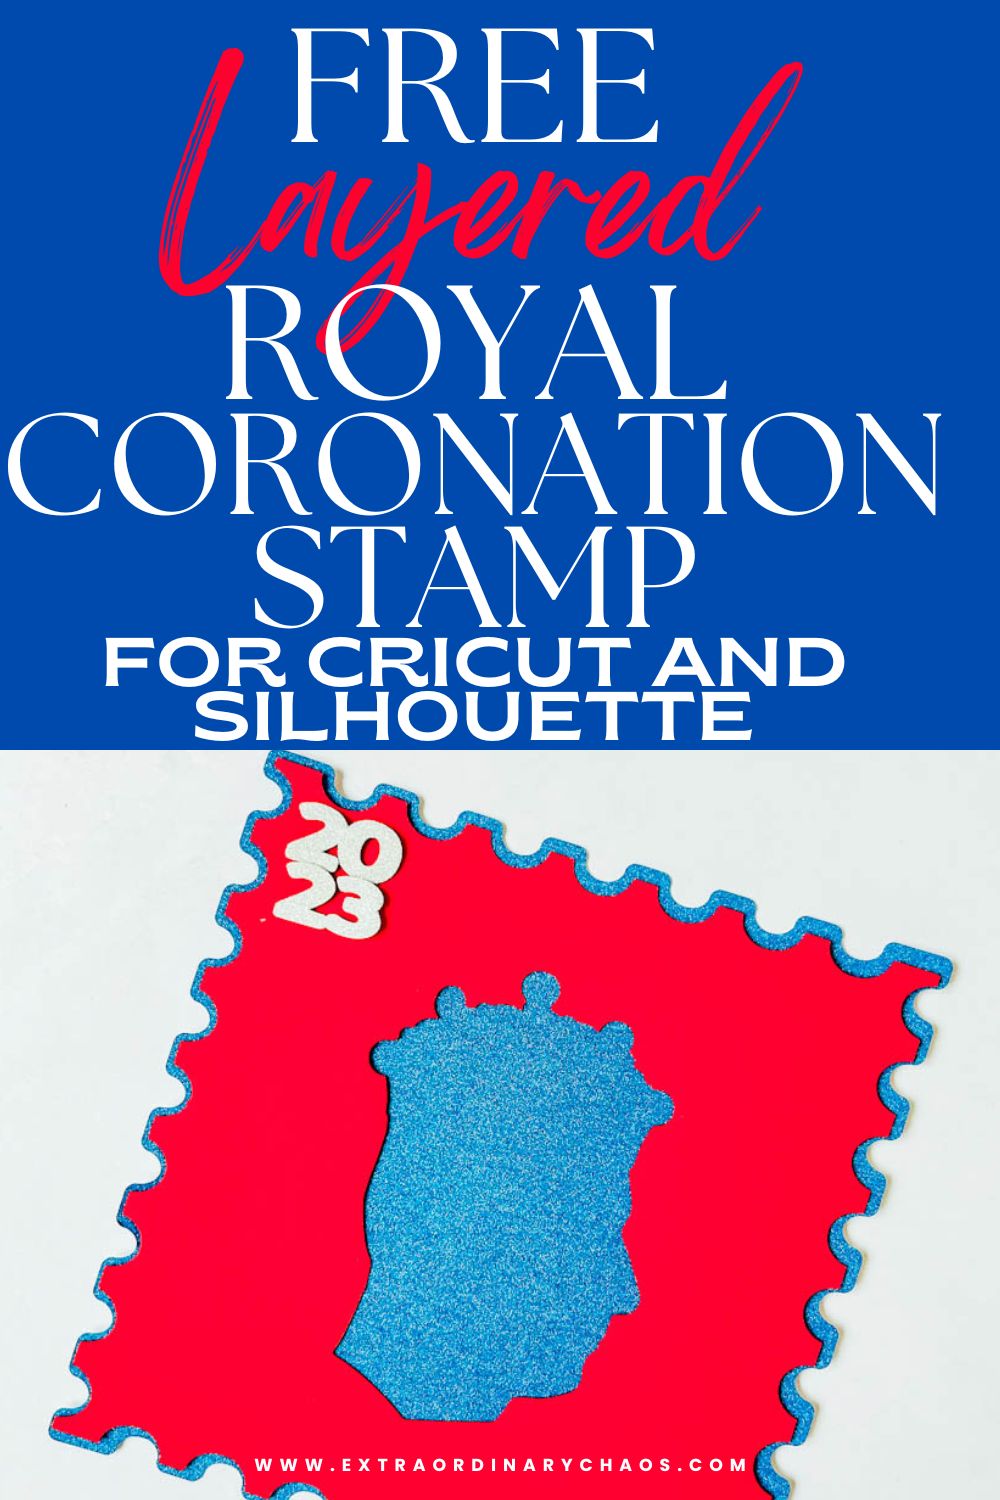 Free Layered Royal Coronation Stamp for Cricut and Silhouette